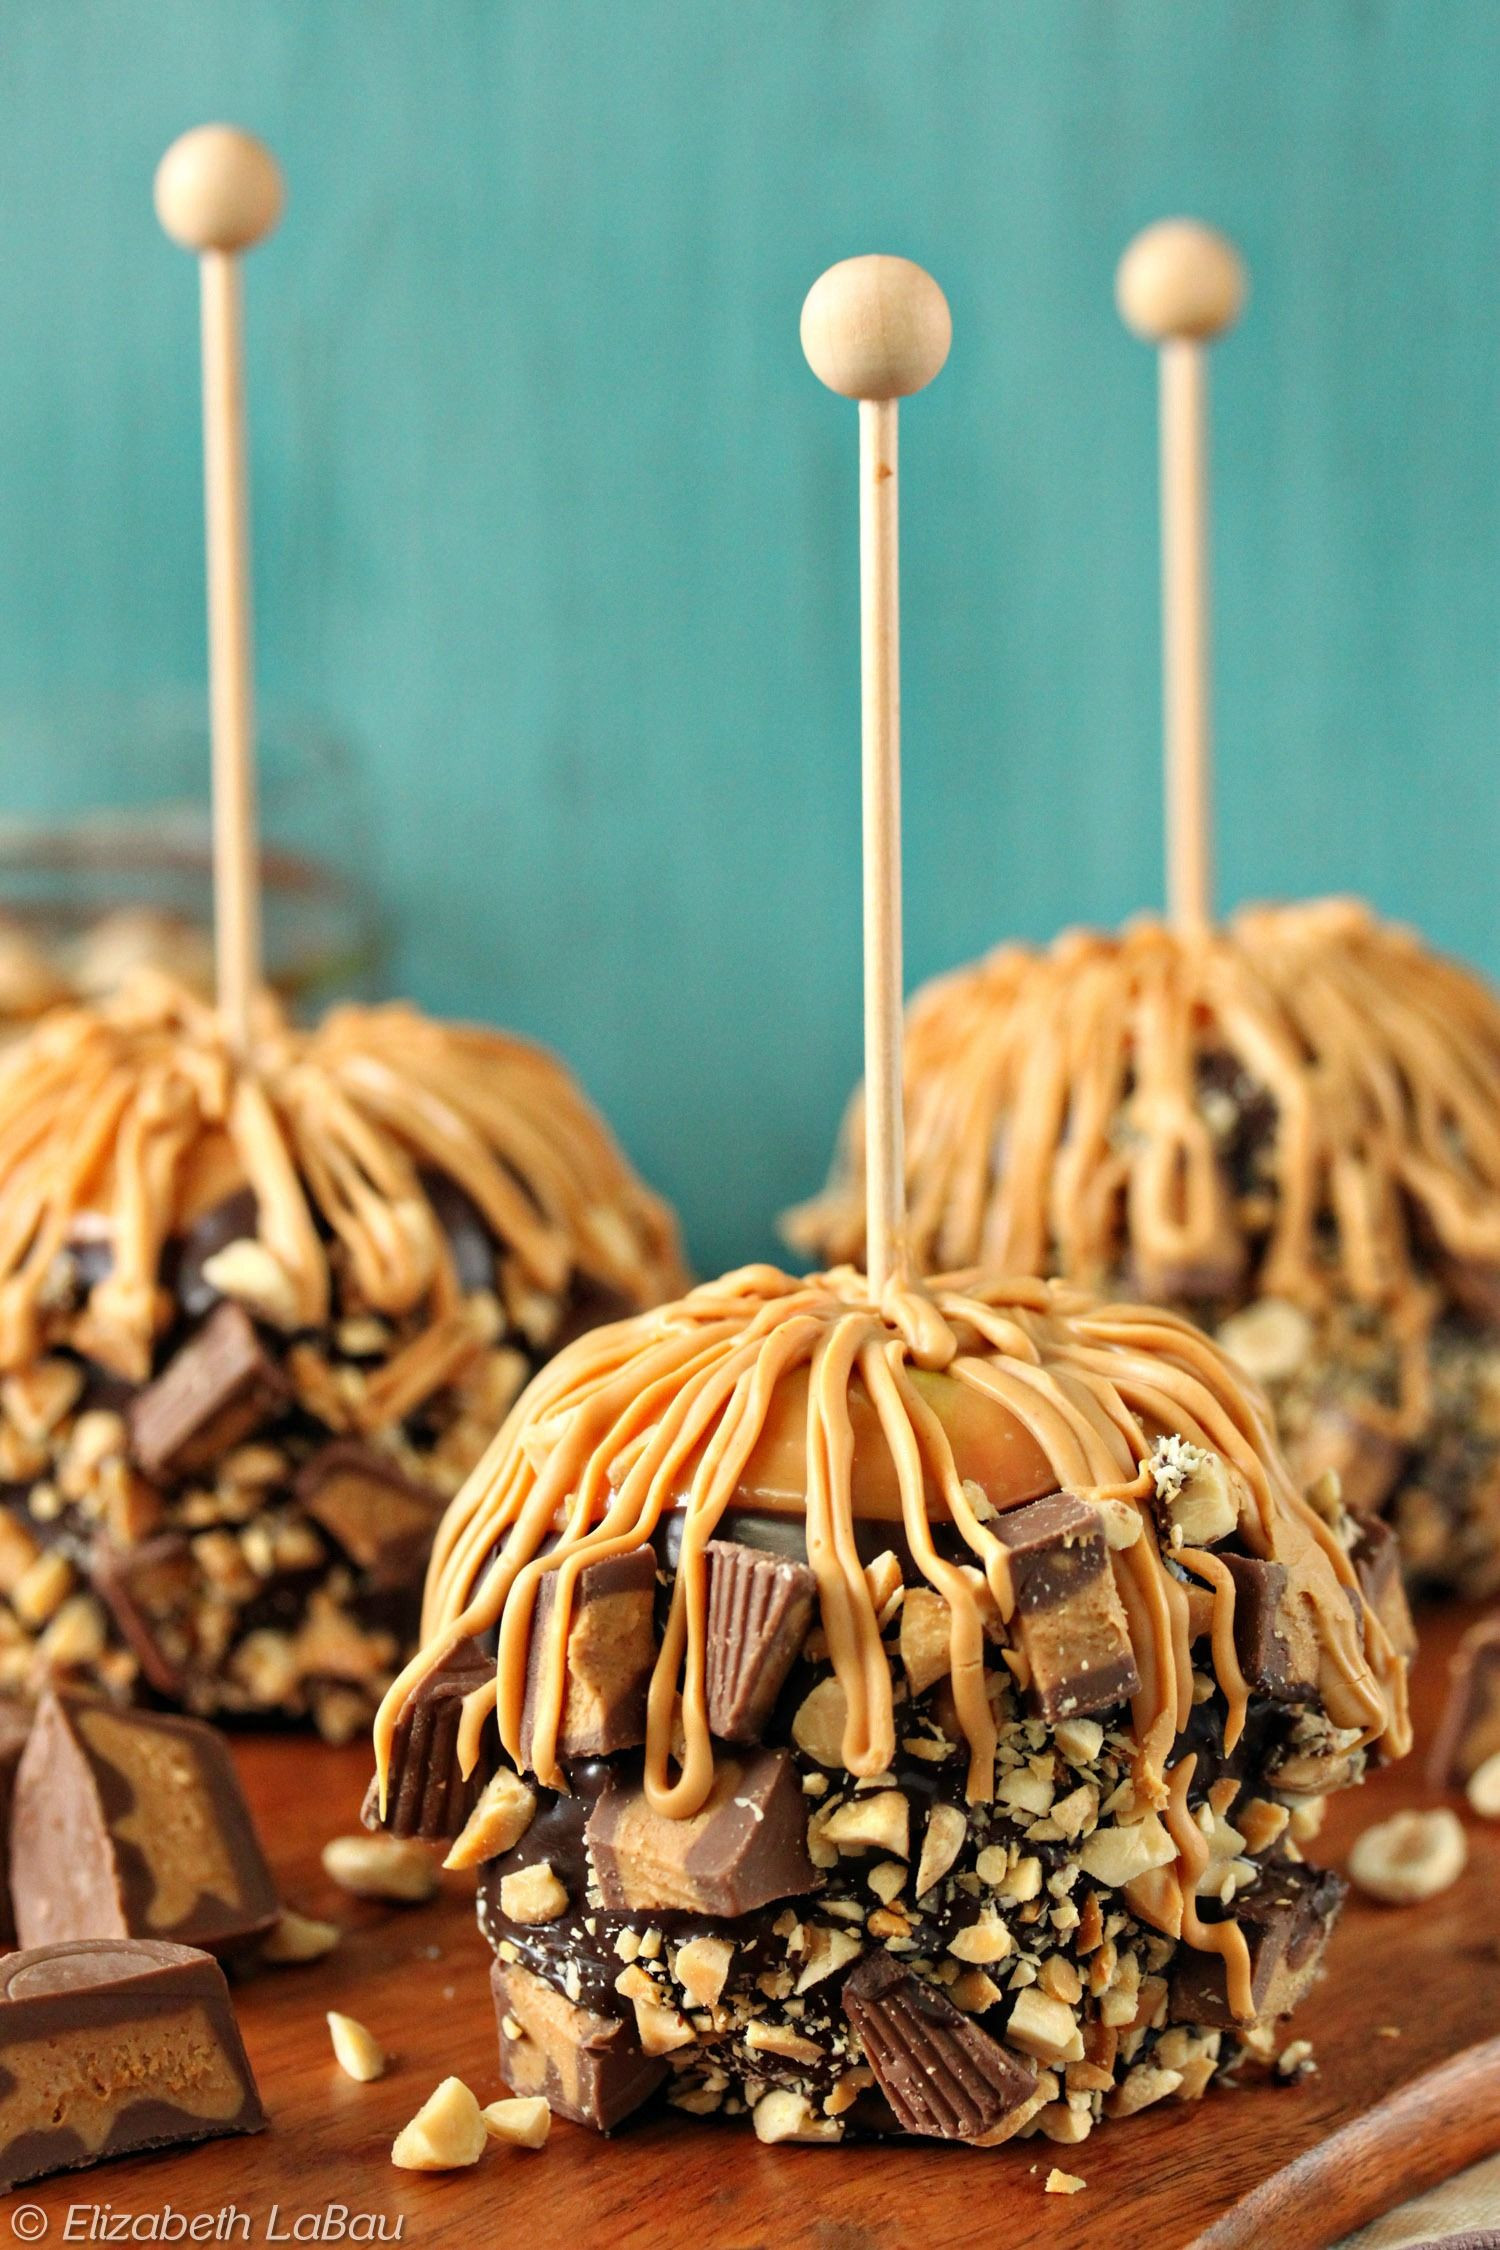 Gourmet Candy Apple Recipes
 Peanut Butter Caramel Apples With Chocolate and Peanut